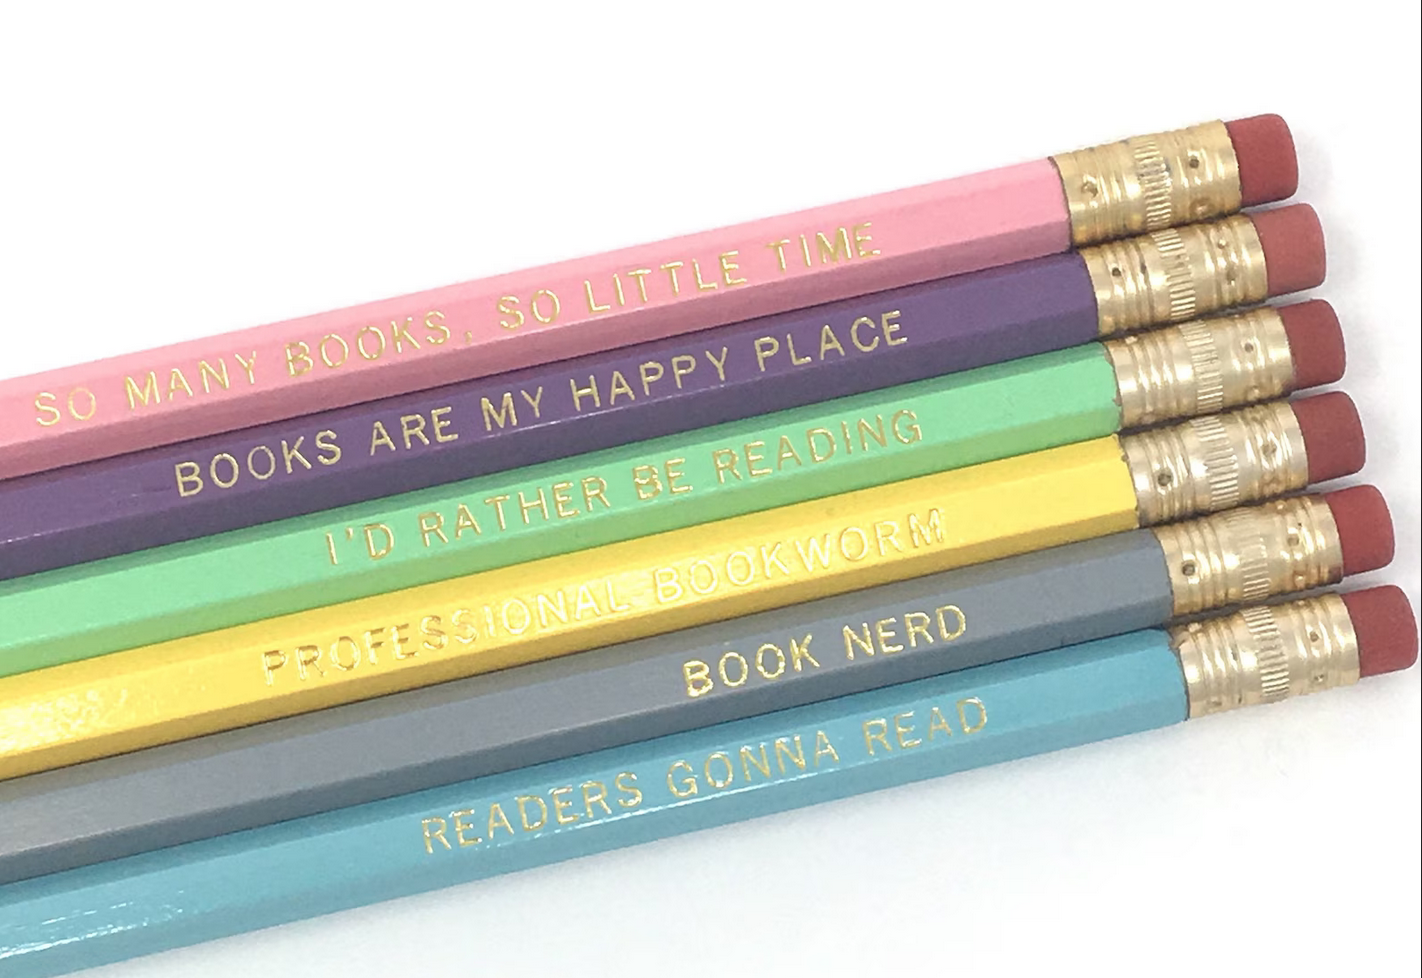 A set of pencils with engraved bookish sayings like "so many books, so little time" and "books are my happy place"